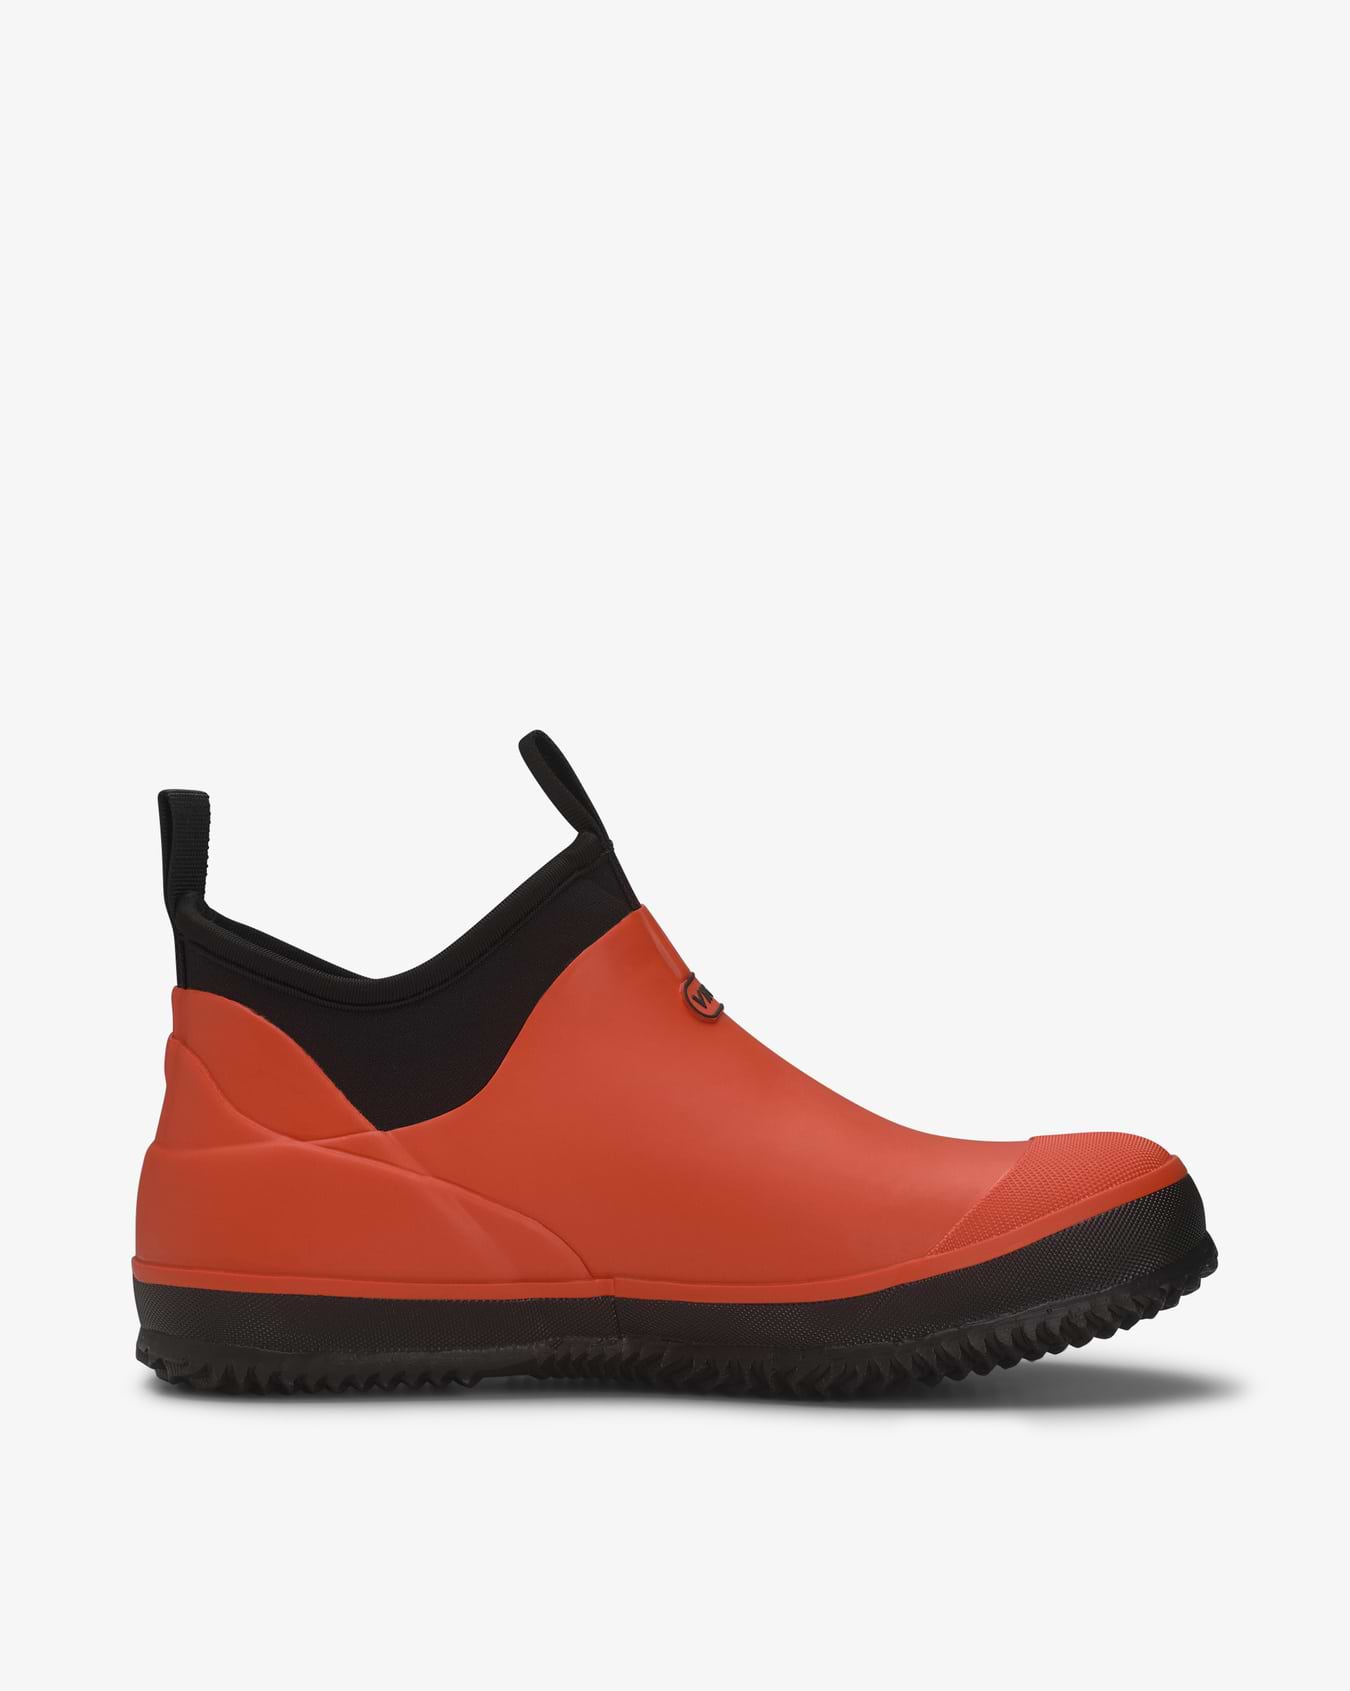 Paveport Red/Black Rubber Boot